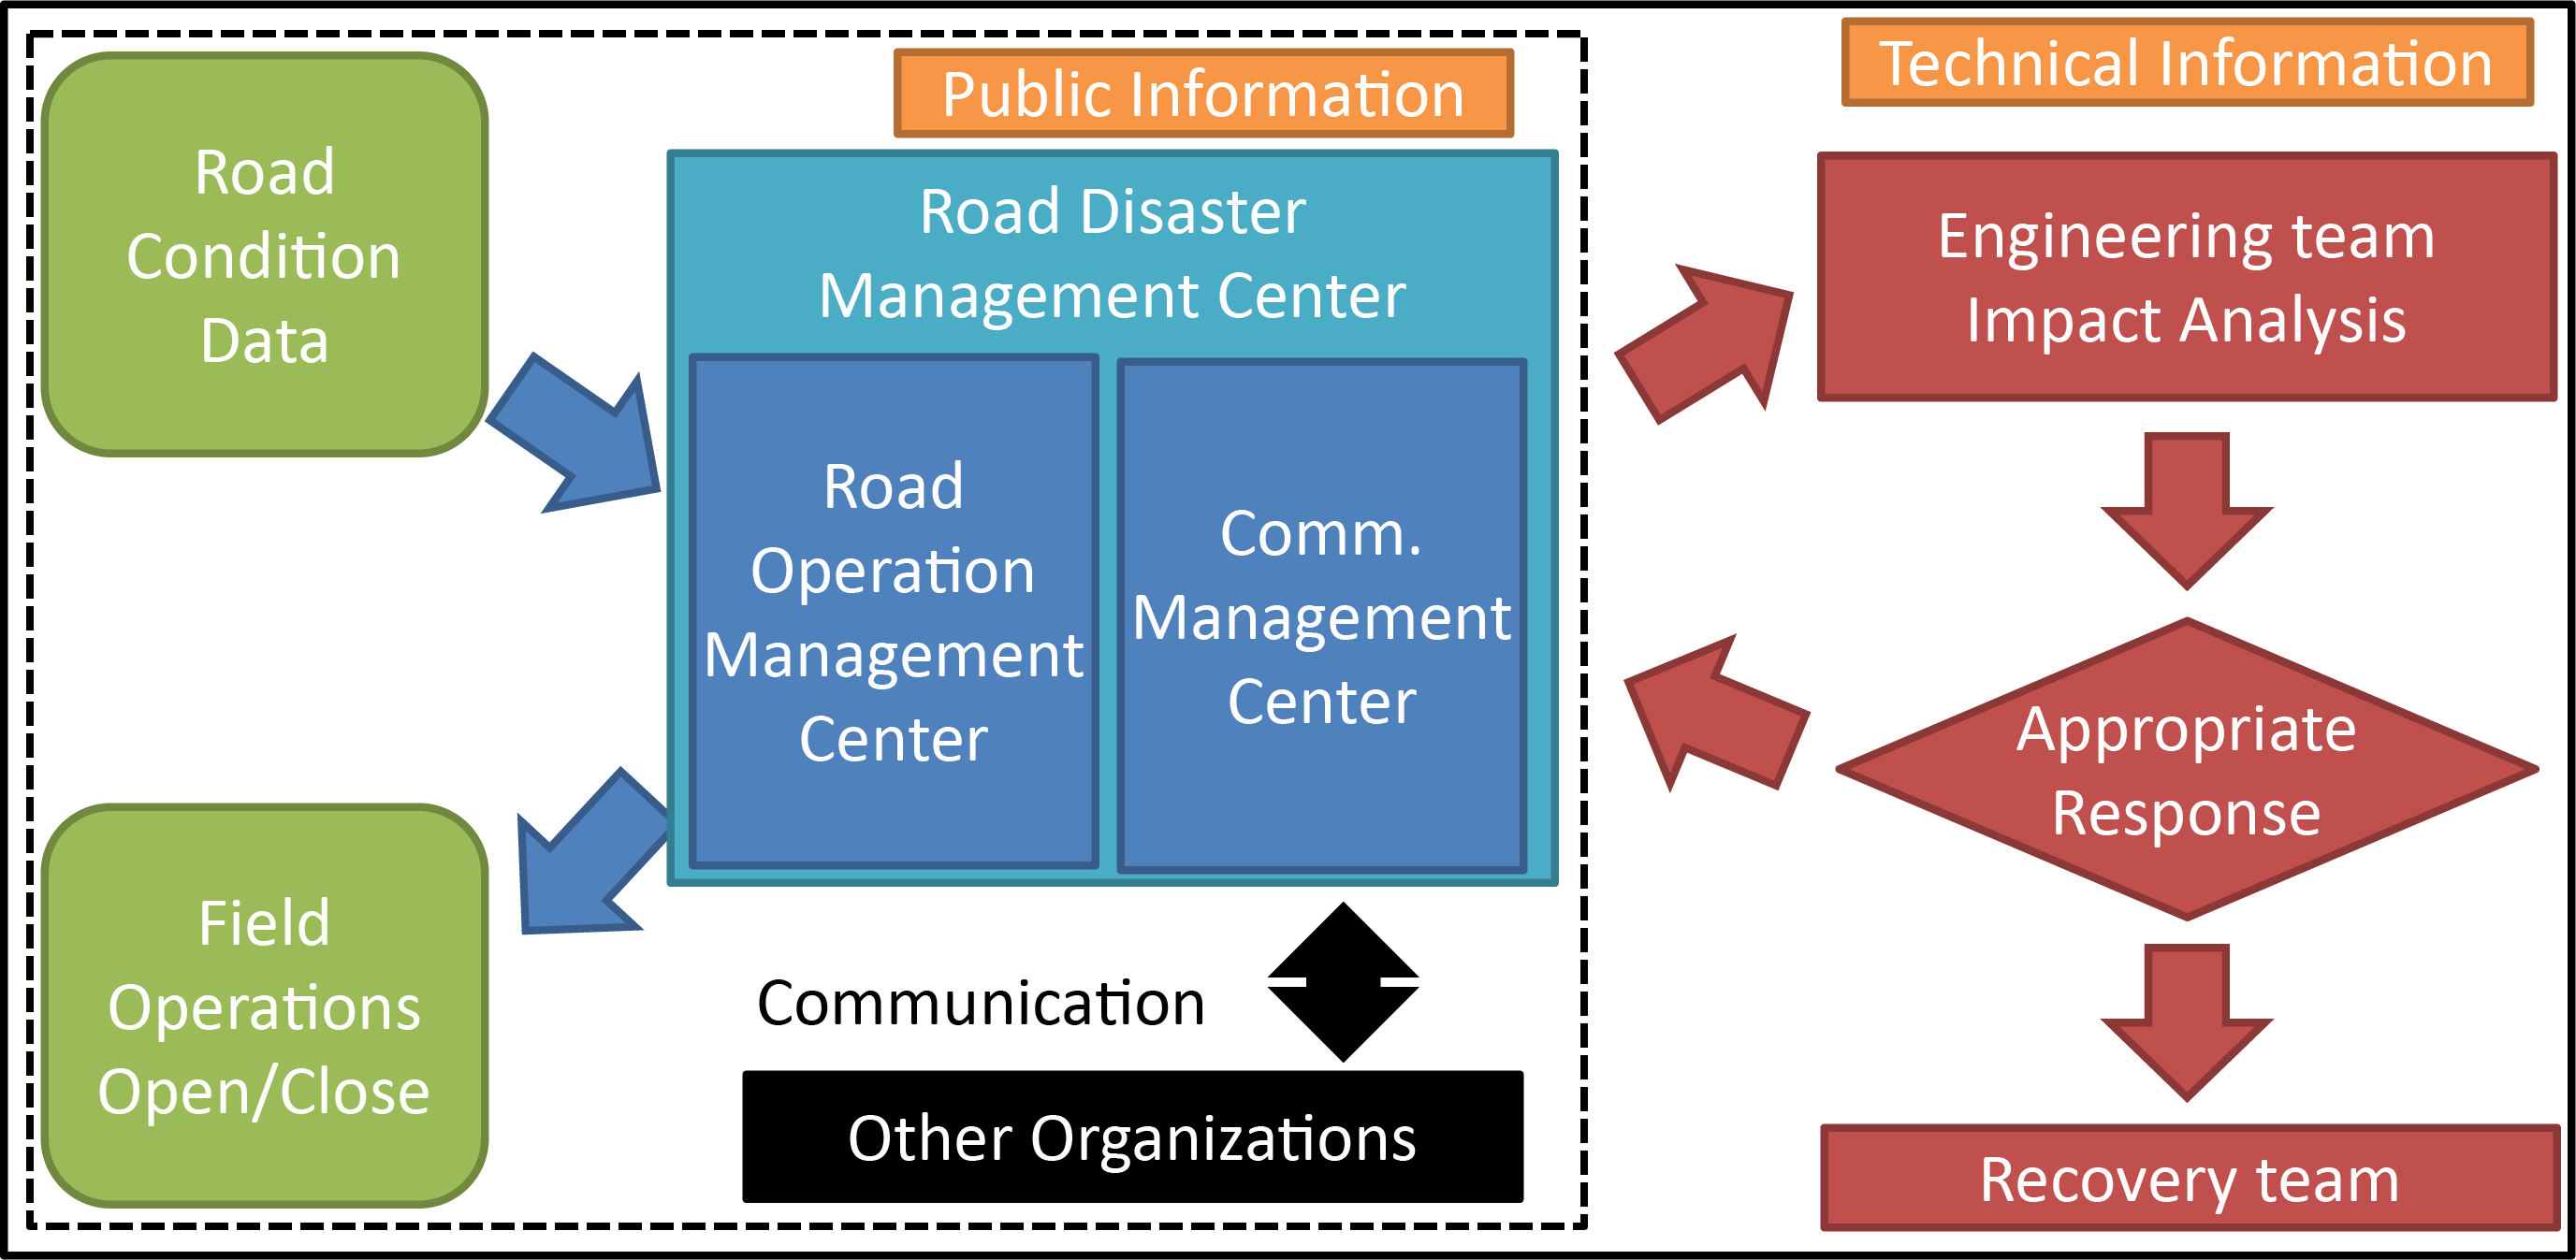 Figure 4.2.2.8 General structure flow of communication in disaster in terms of technical information